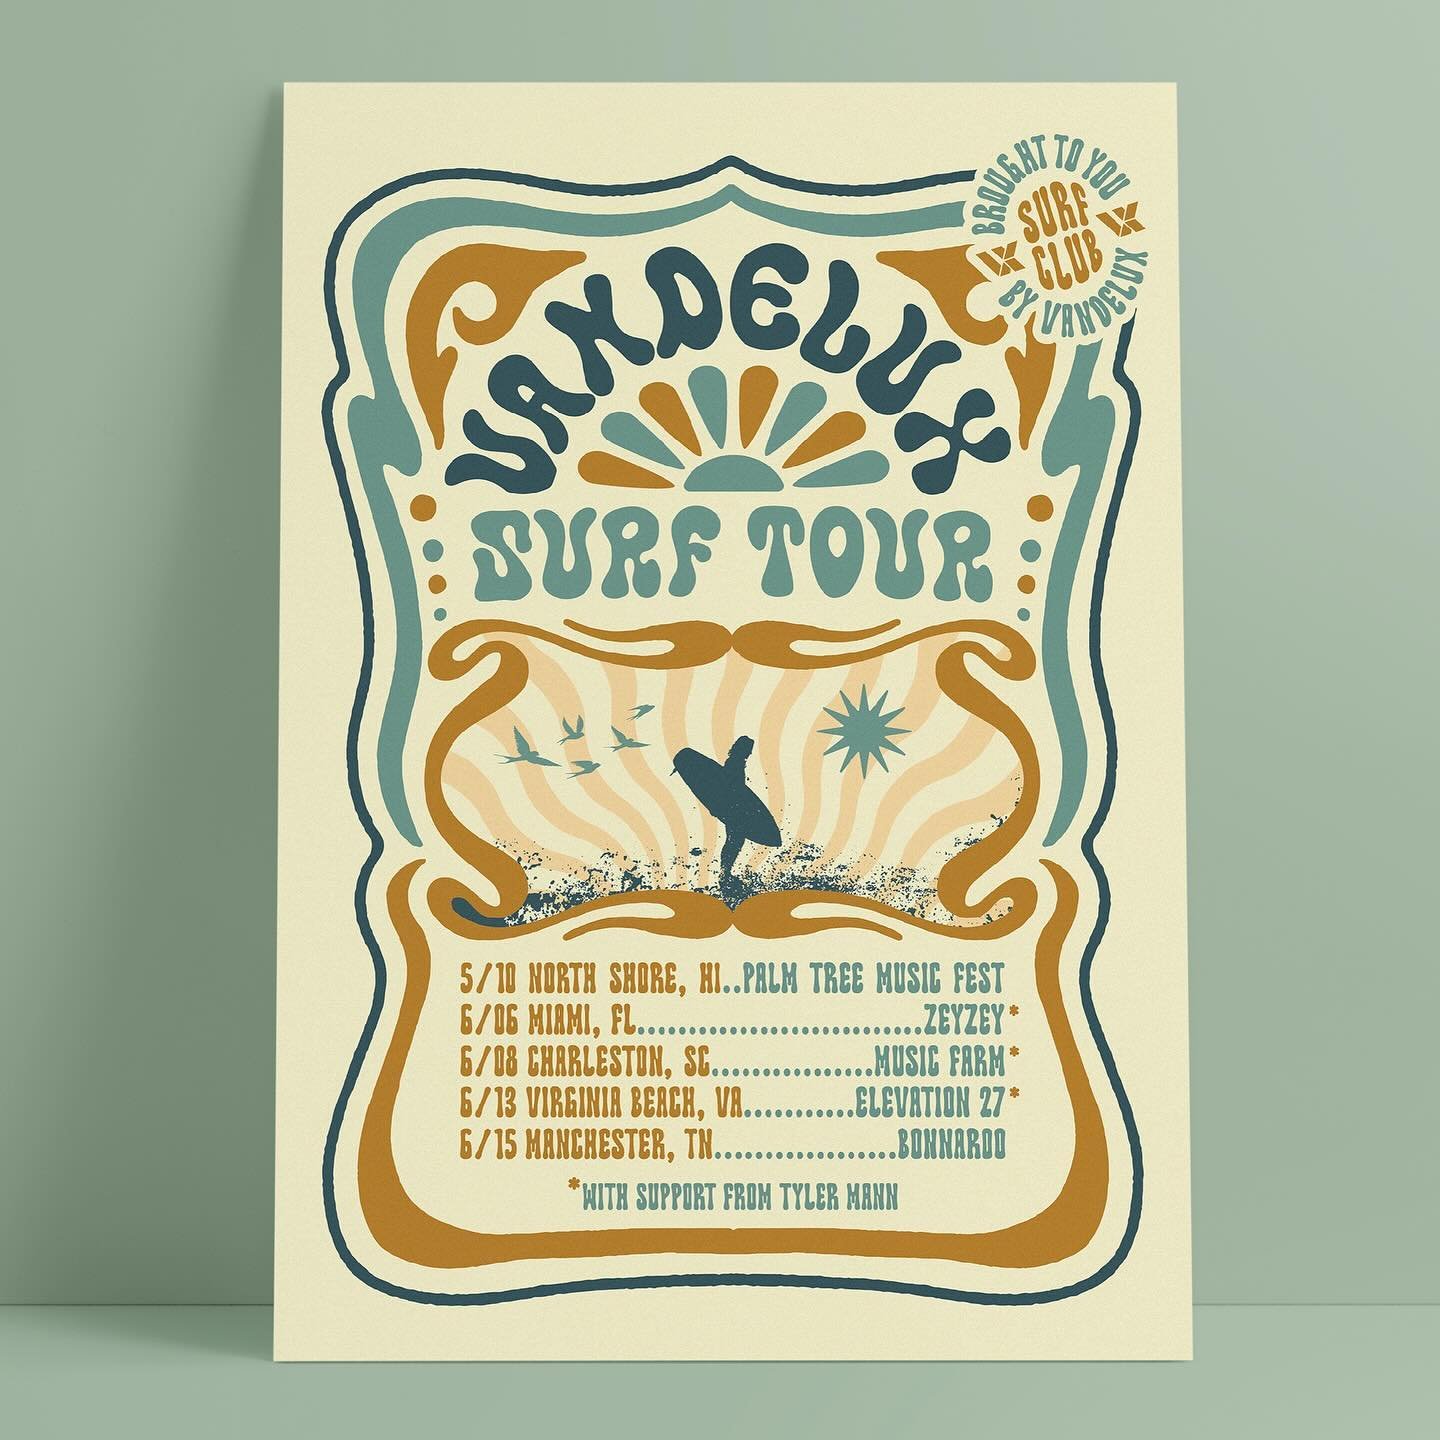 Super stoked to share this tour poster I got to make for @vandeluxmusic 
Most of the stops on the tour are coastal, so they wanted to go for a surf tour vibe on the poster which I had a lot of fun with!

I blended a few different styles into this one